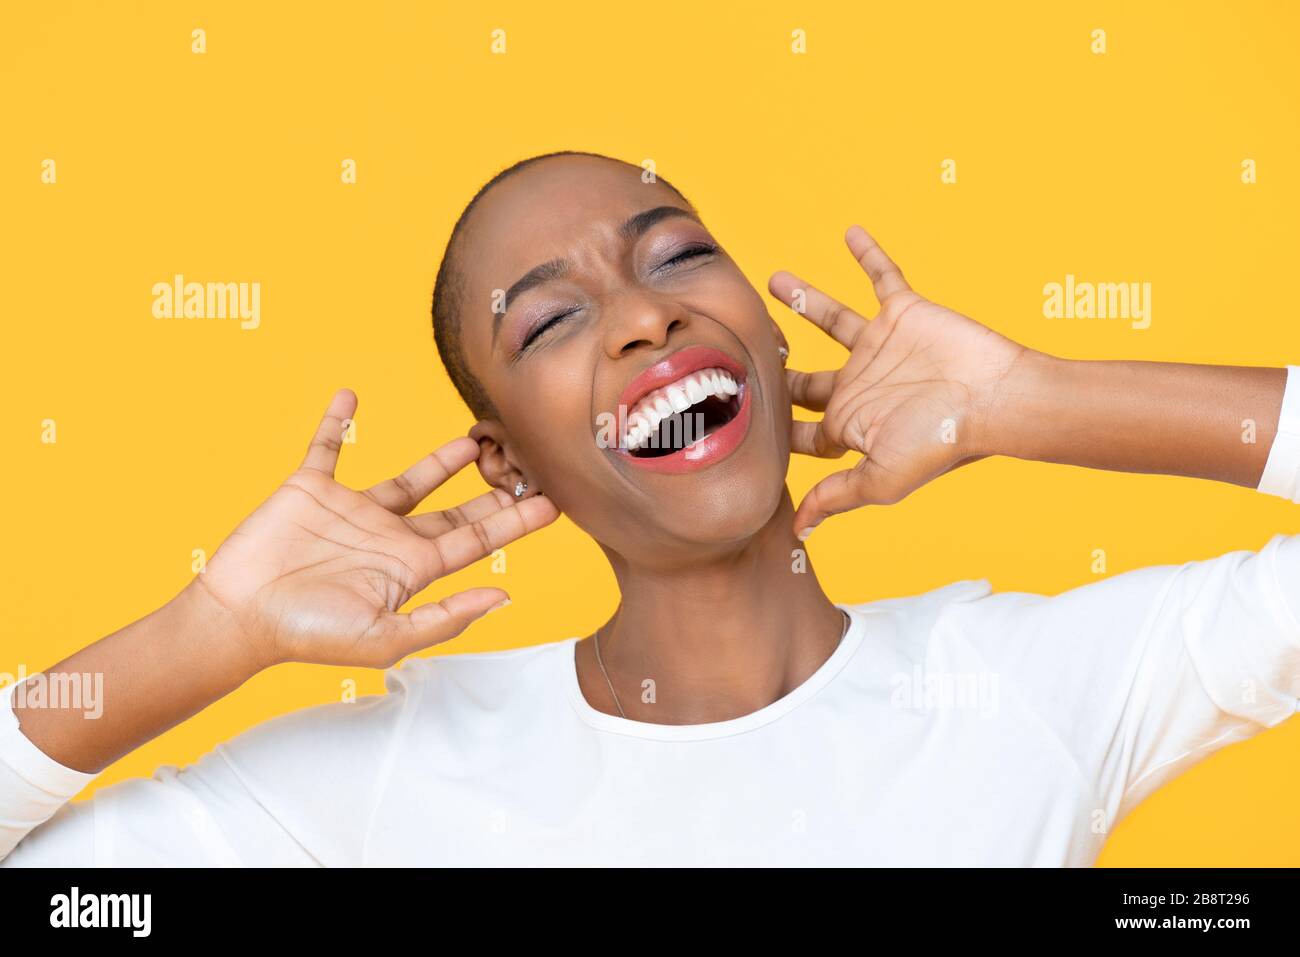 African American woman laughing with joy expressing happiness and fun on yellow background Stock Photo